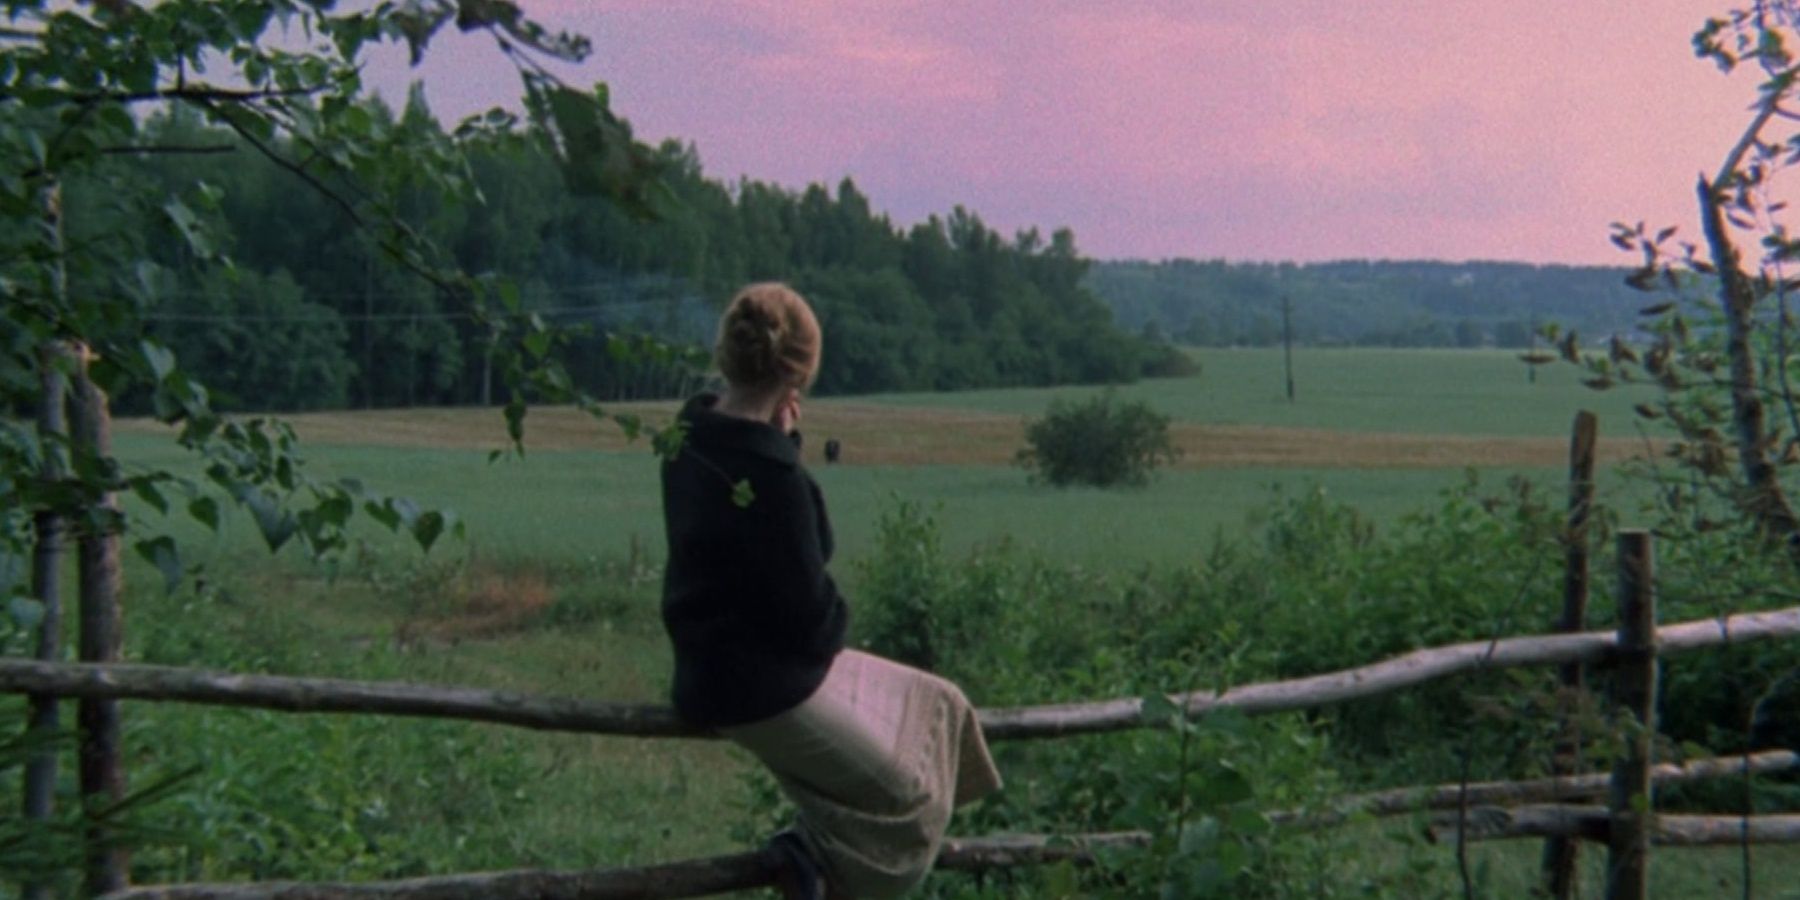 A woman sitting on a wooden fence looking at the sky and landscape in a still from Mirror